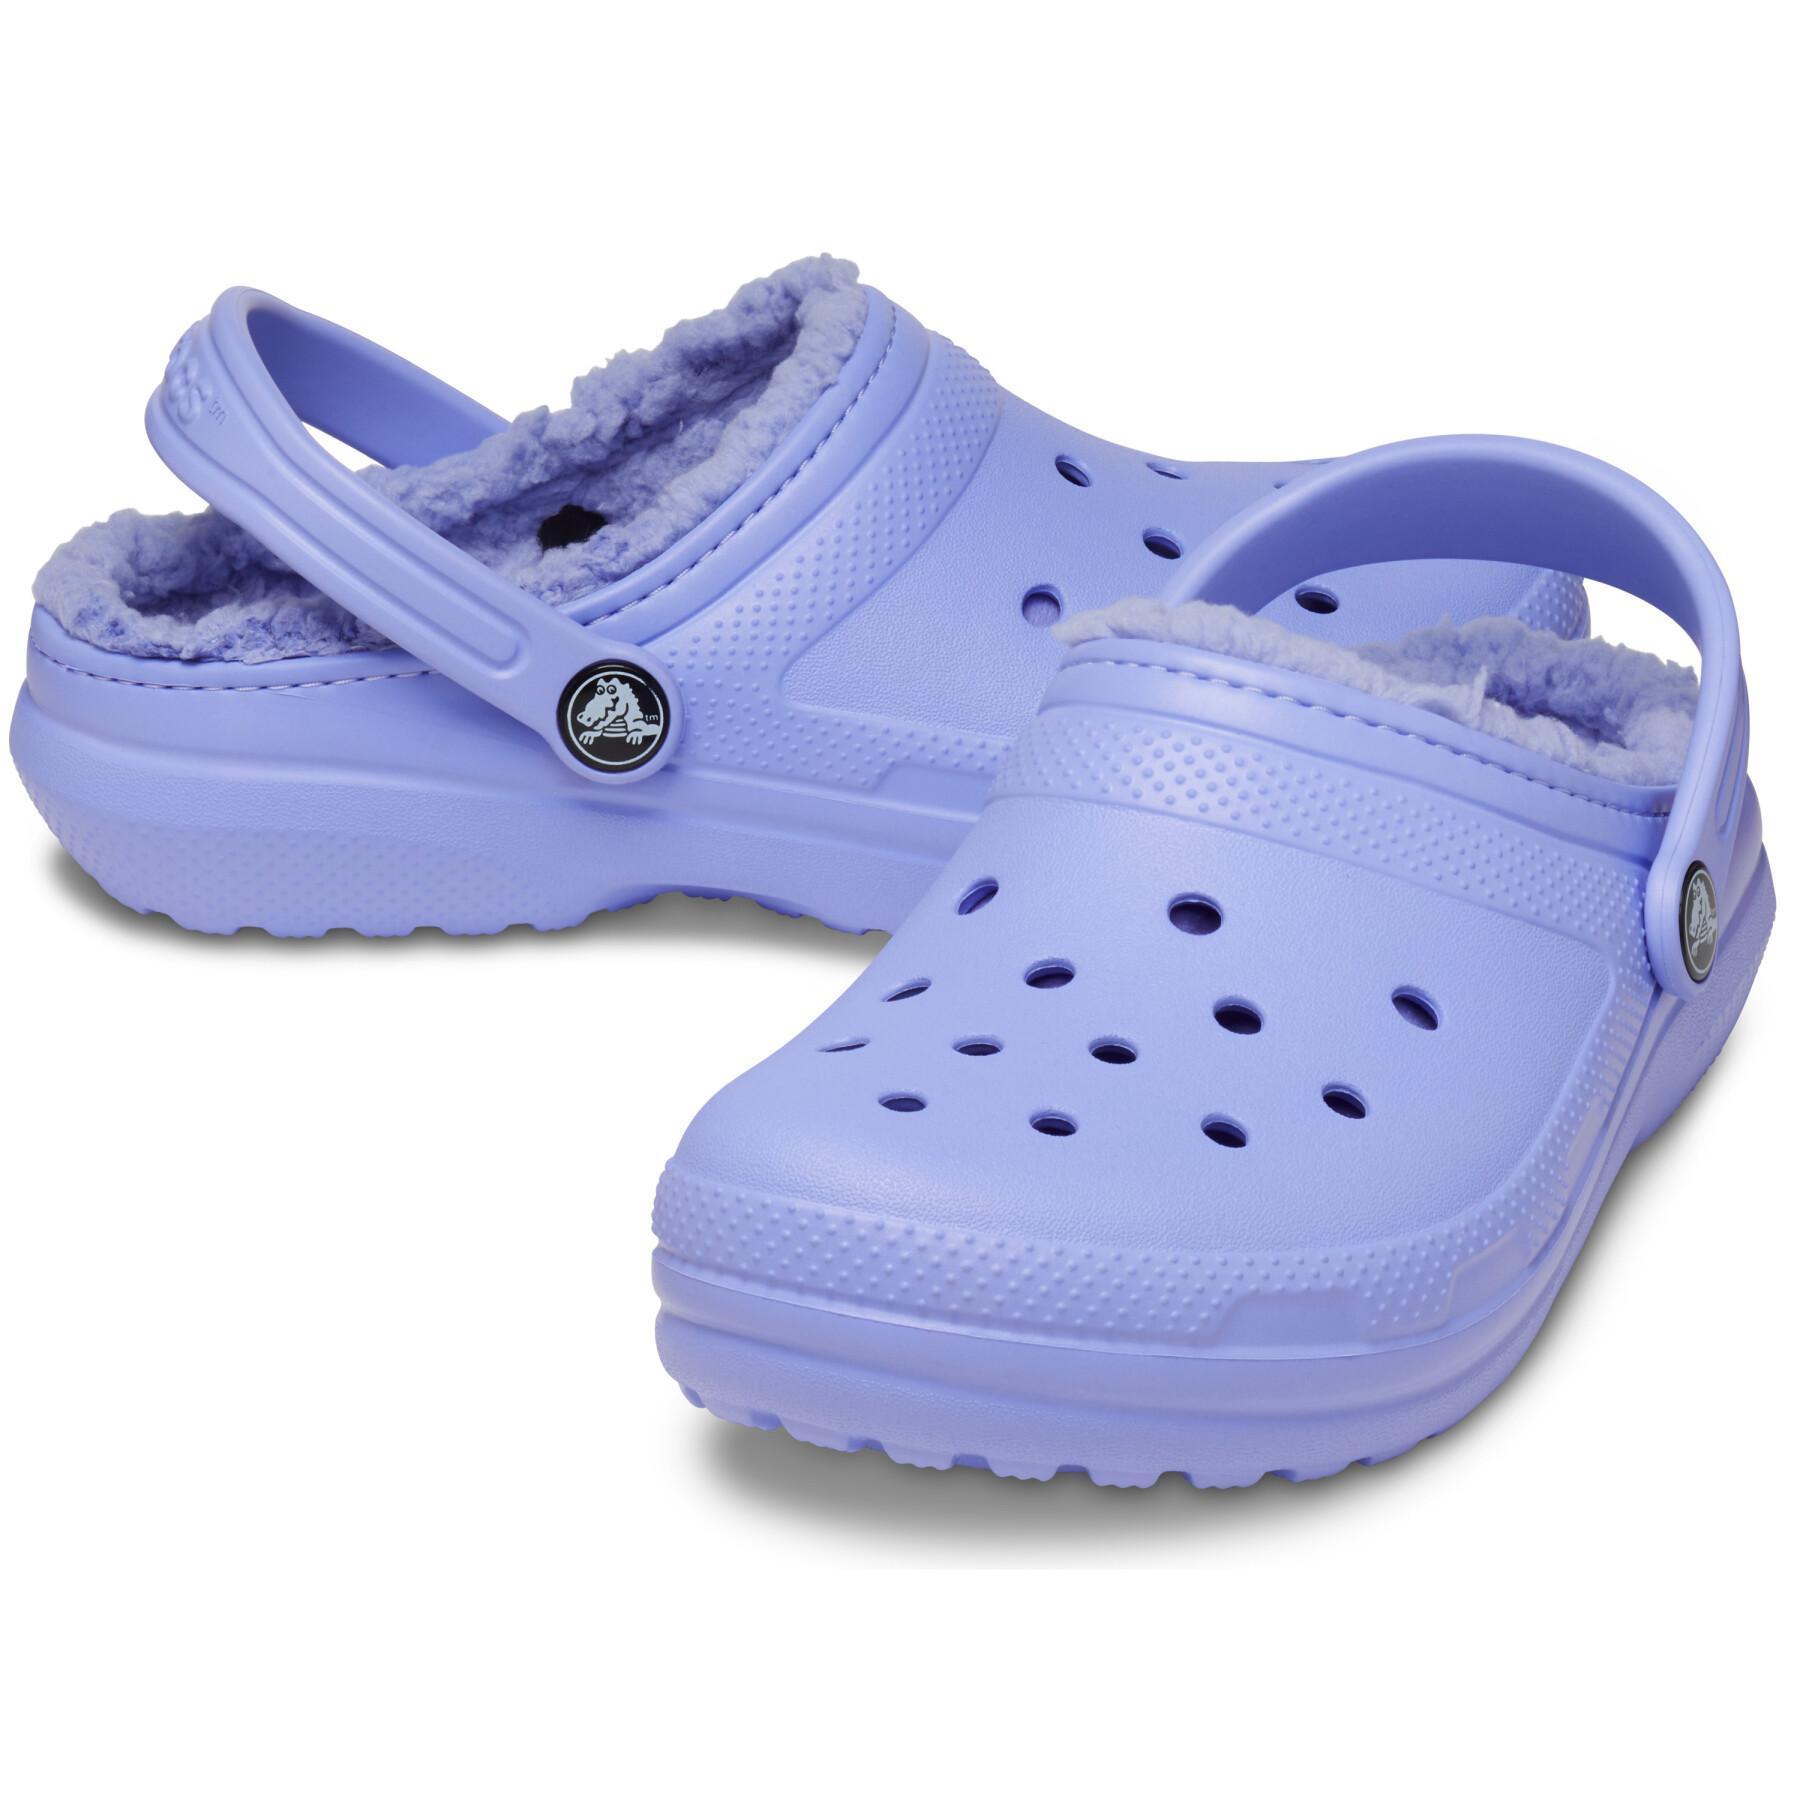 Baby klompen Crocs Classic Lined